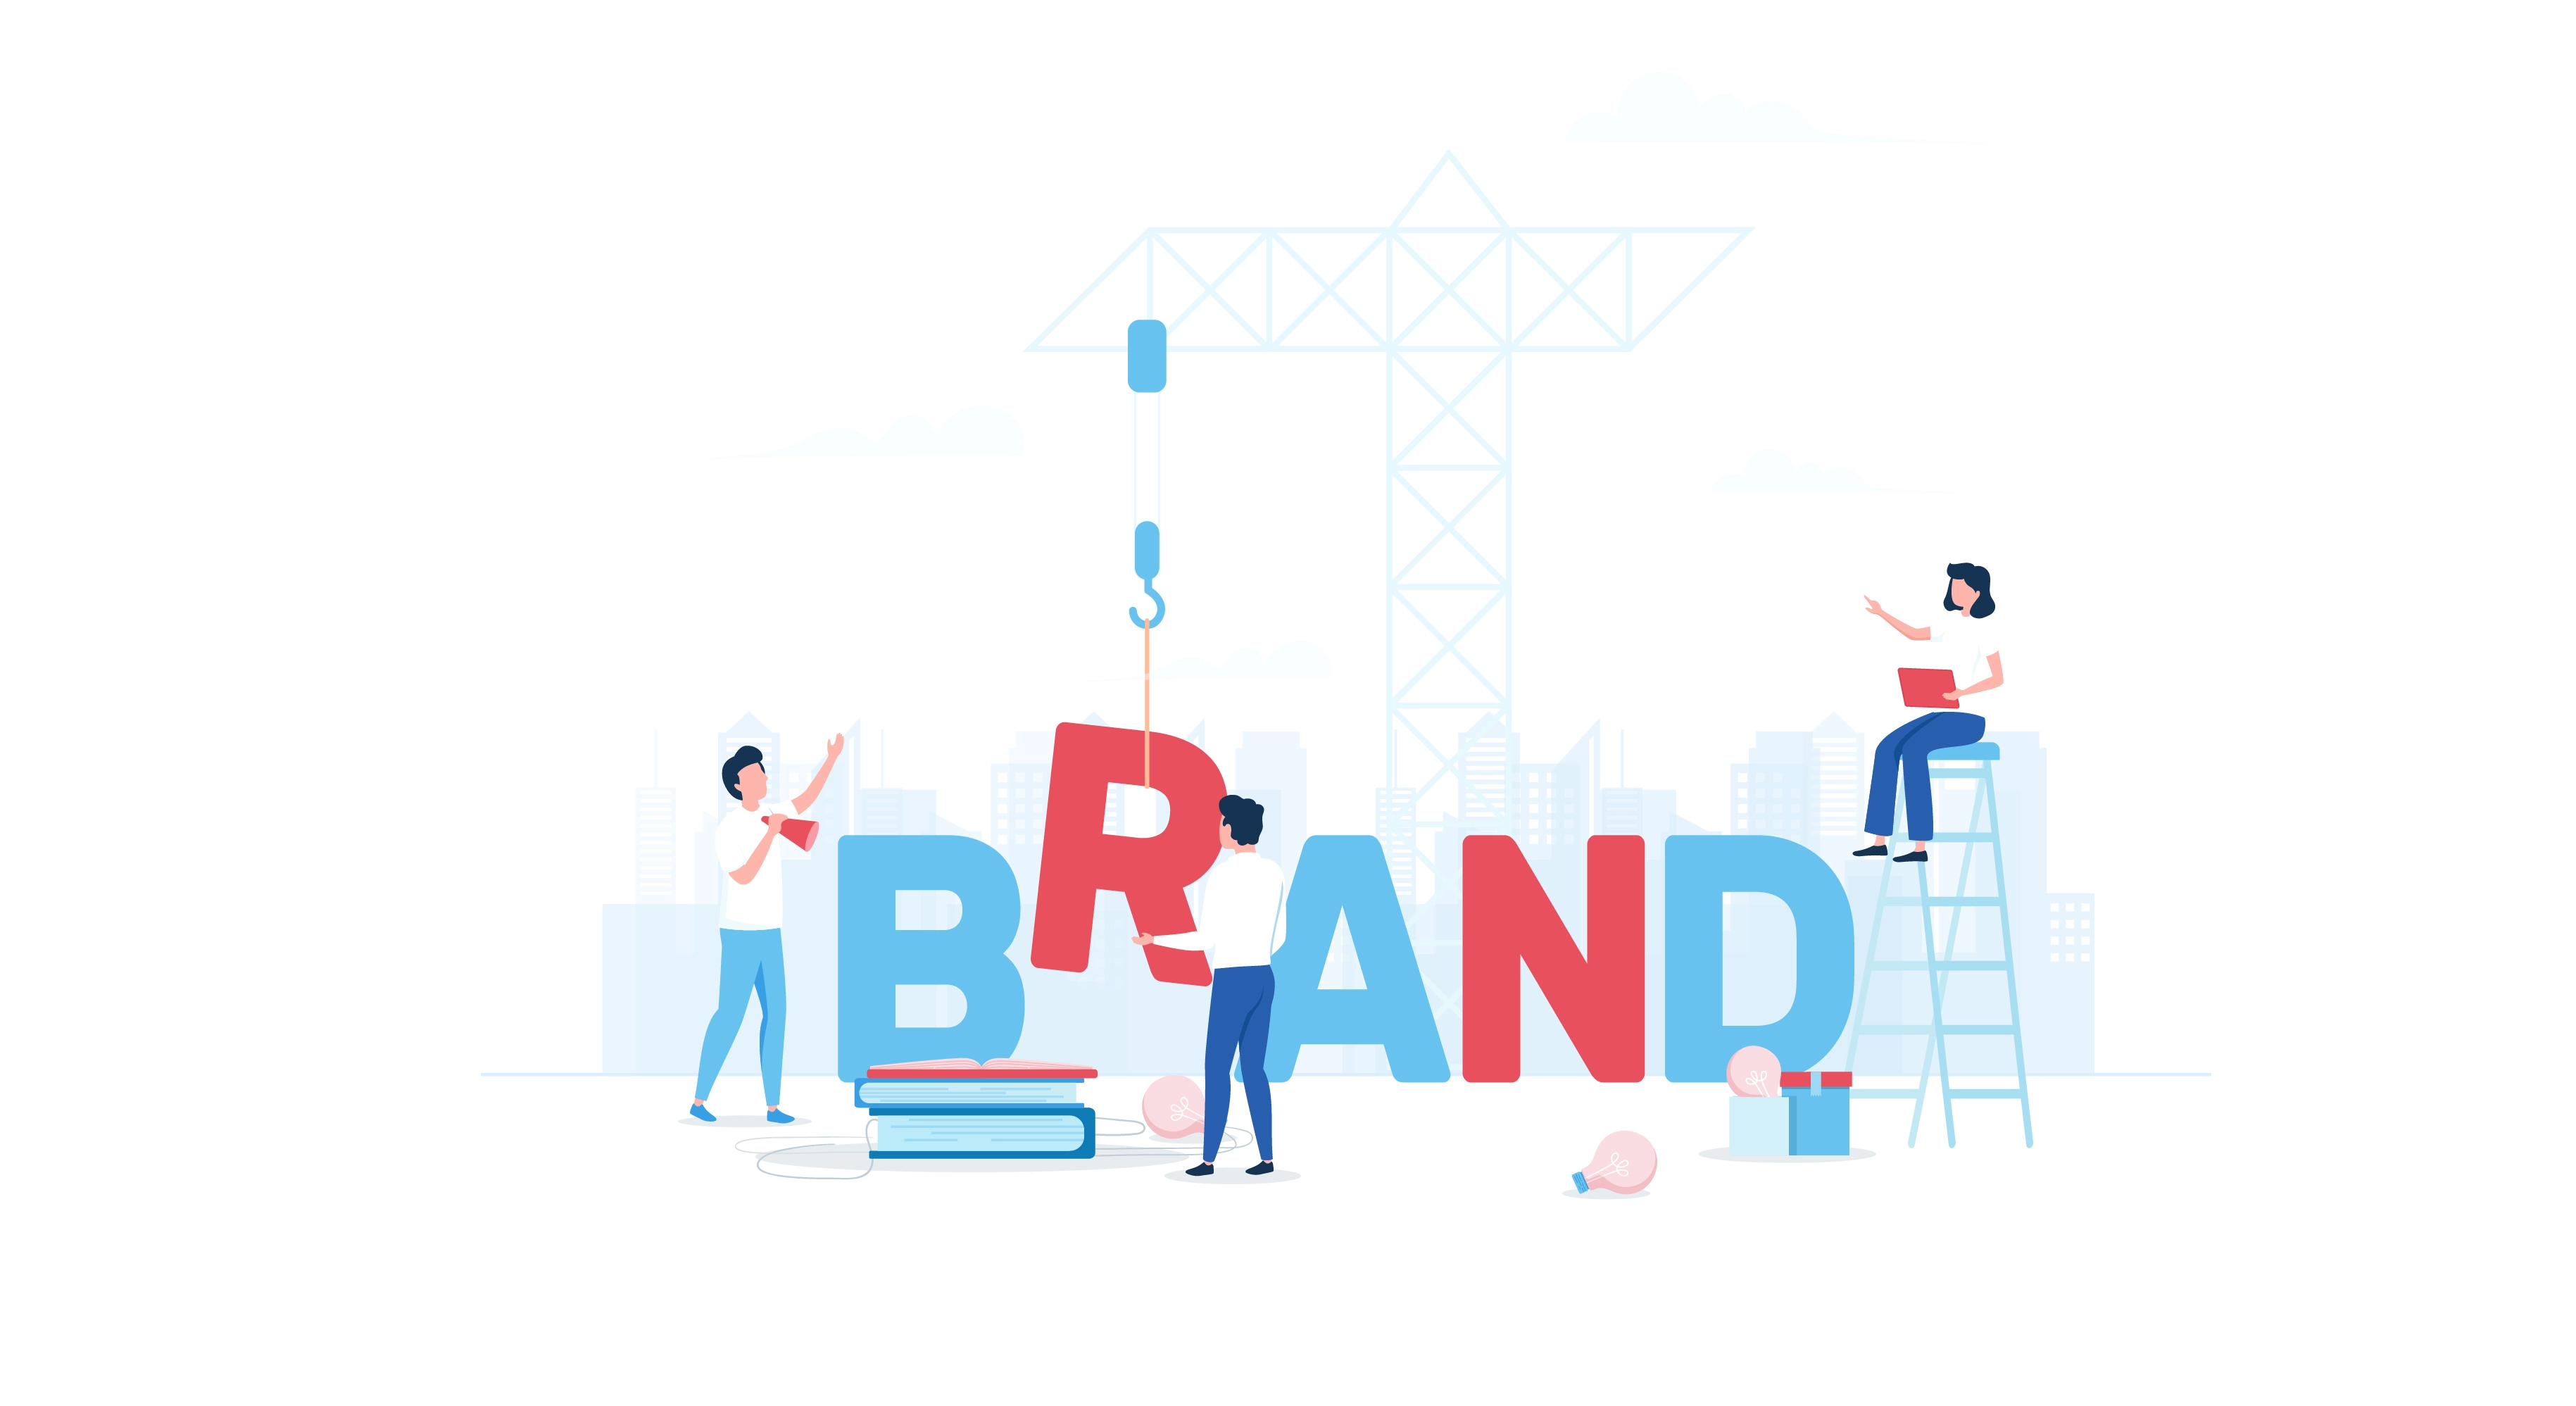 How to choose a Brand name for your business: 12 Steps